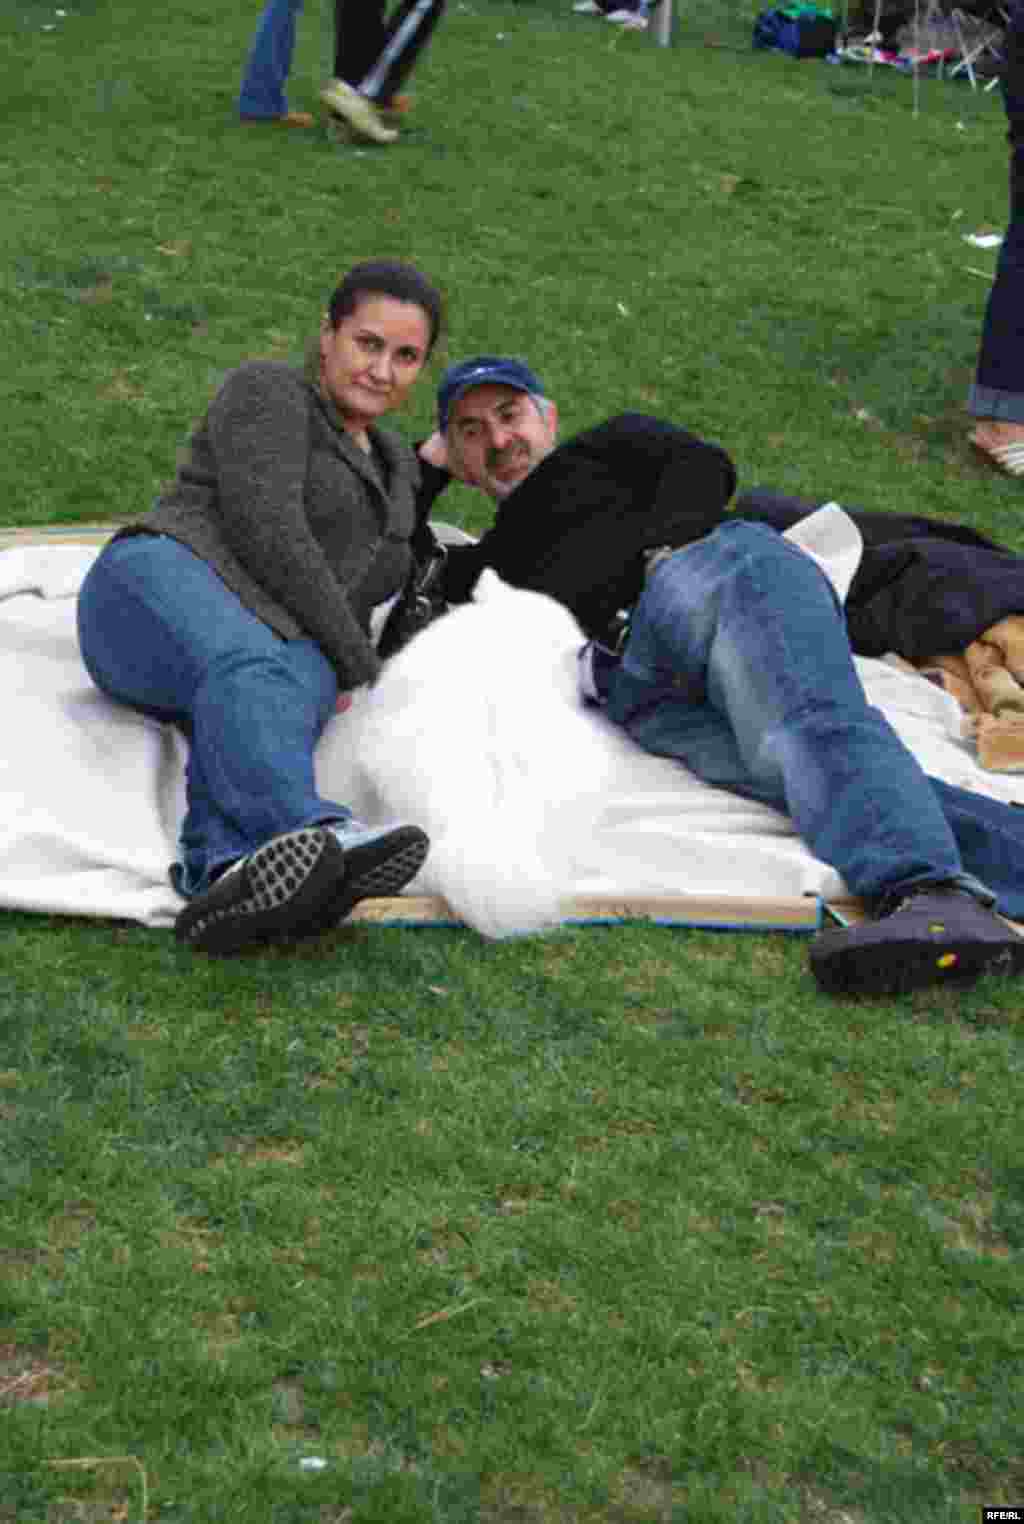 U.S. -- 13 Bedar in Black Hill, is the Persian Festival of springs. It is a full day of mass Outdoors Picnic, which occurs on the 13th day of Norouz, 01Apr2007